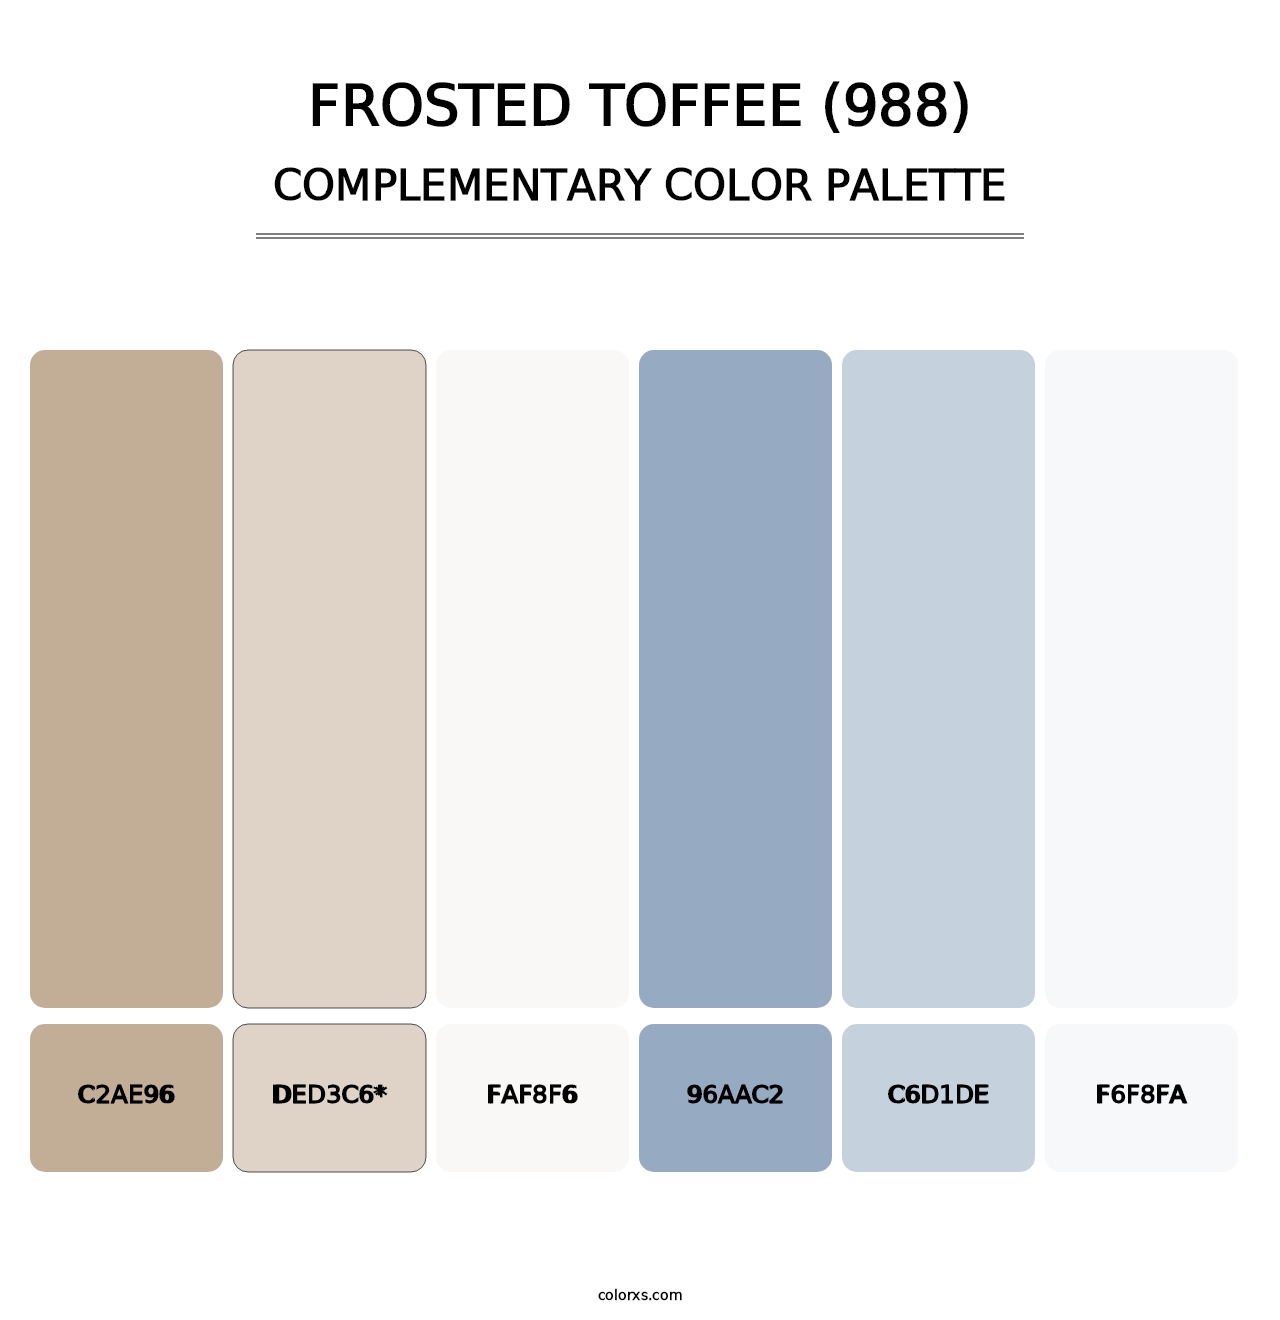 Frosted Toffee (988) - Complementary Color Palette